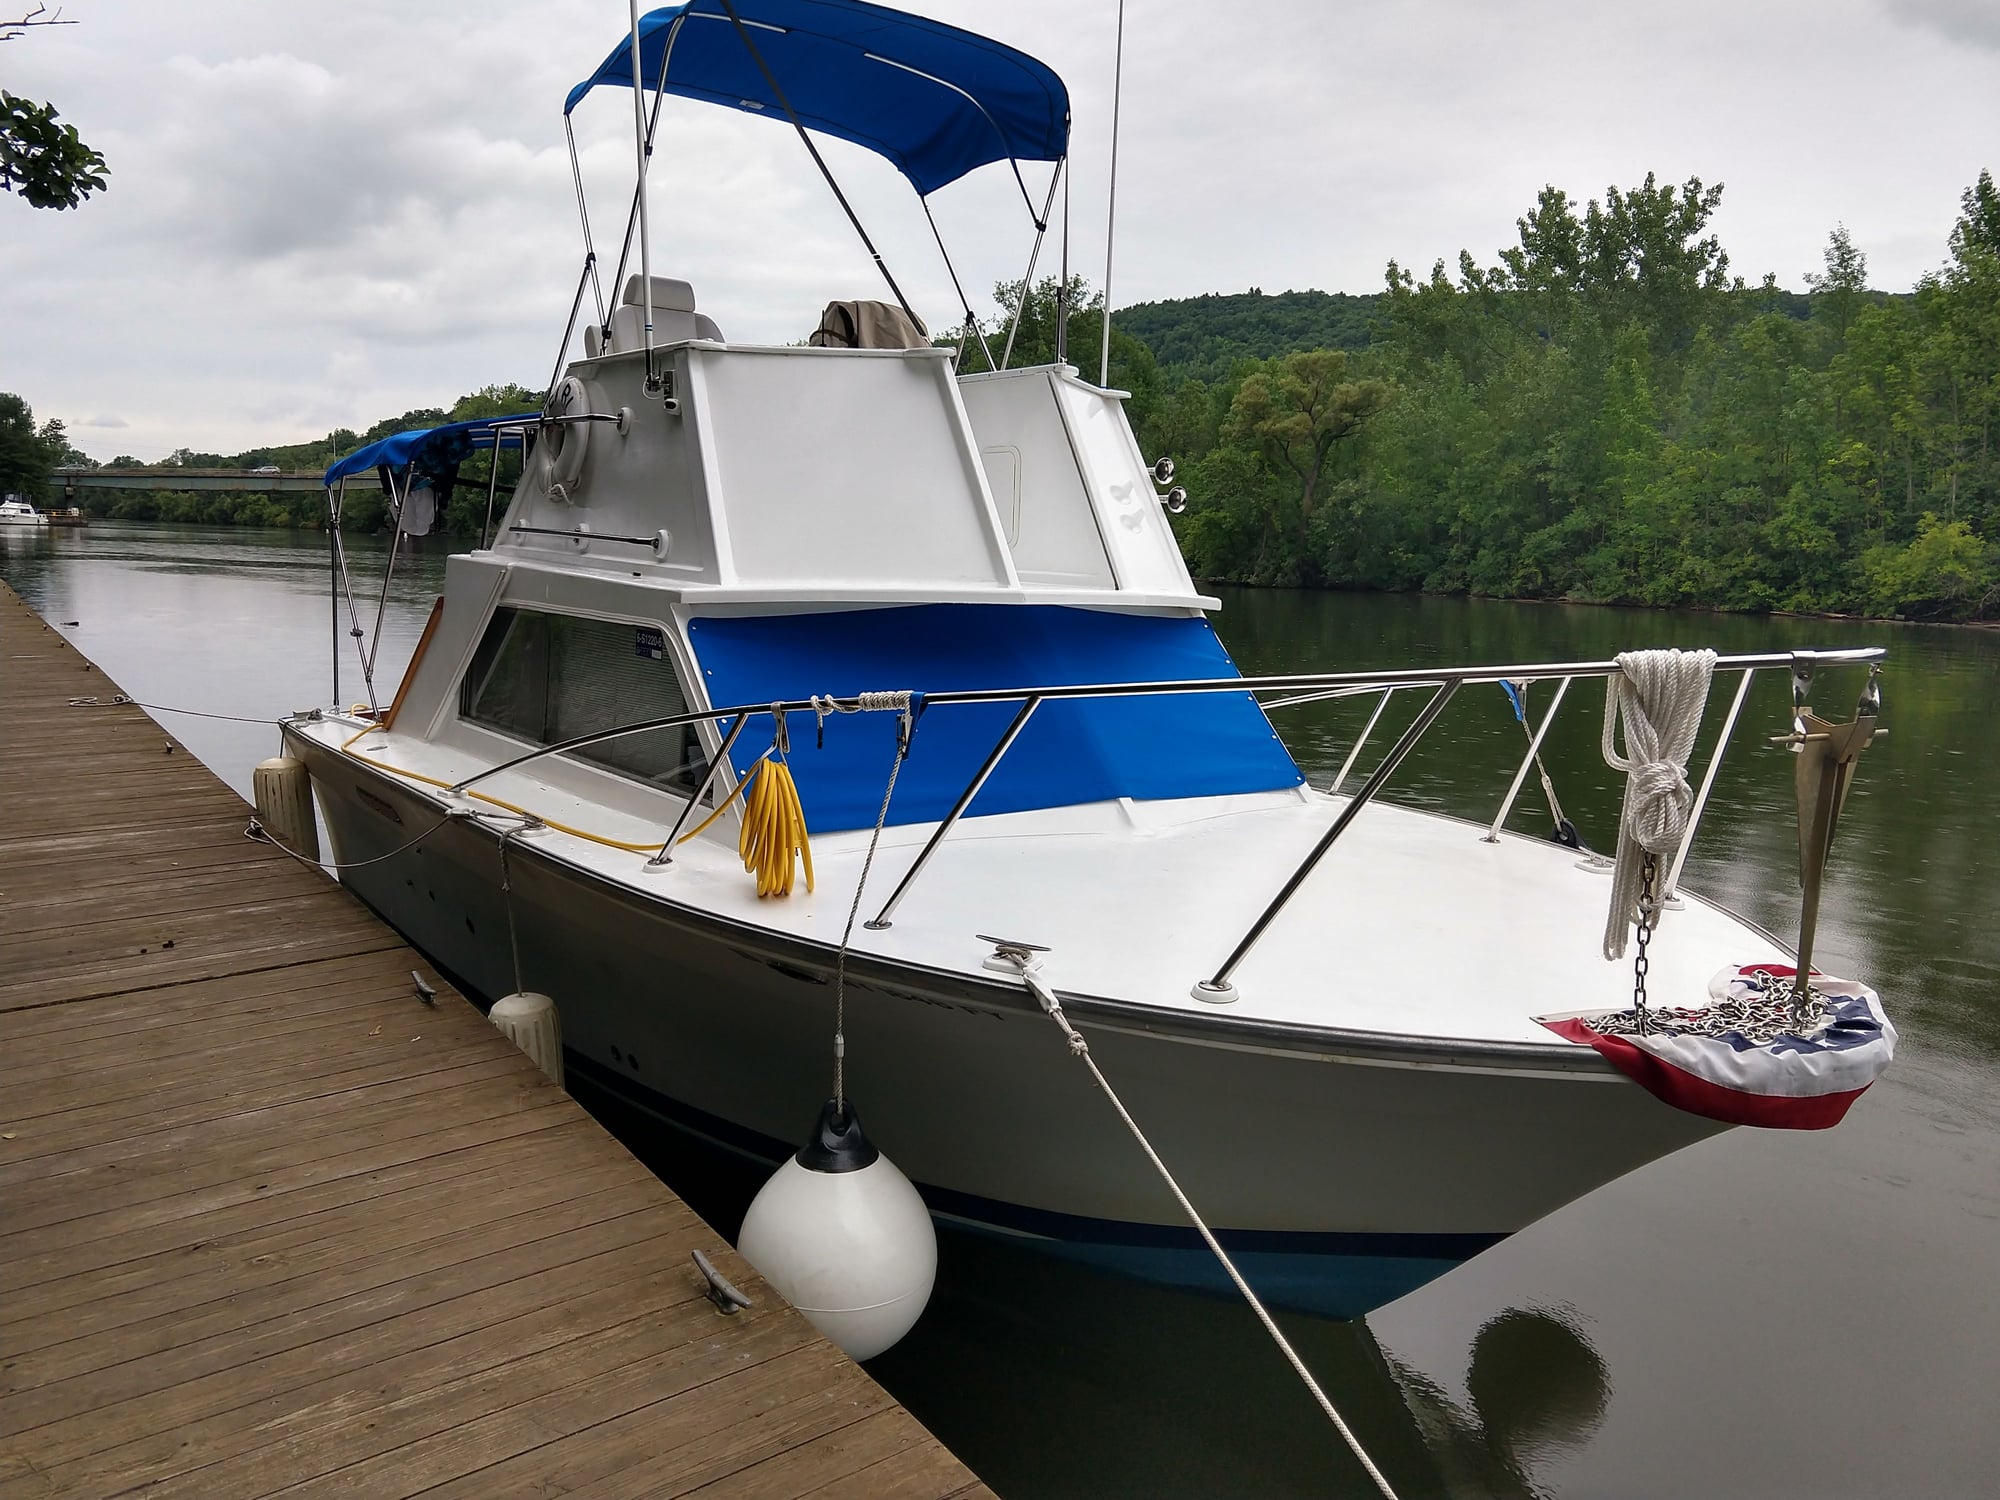 What to Look for in a Used Fishing Boat